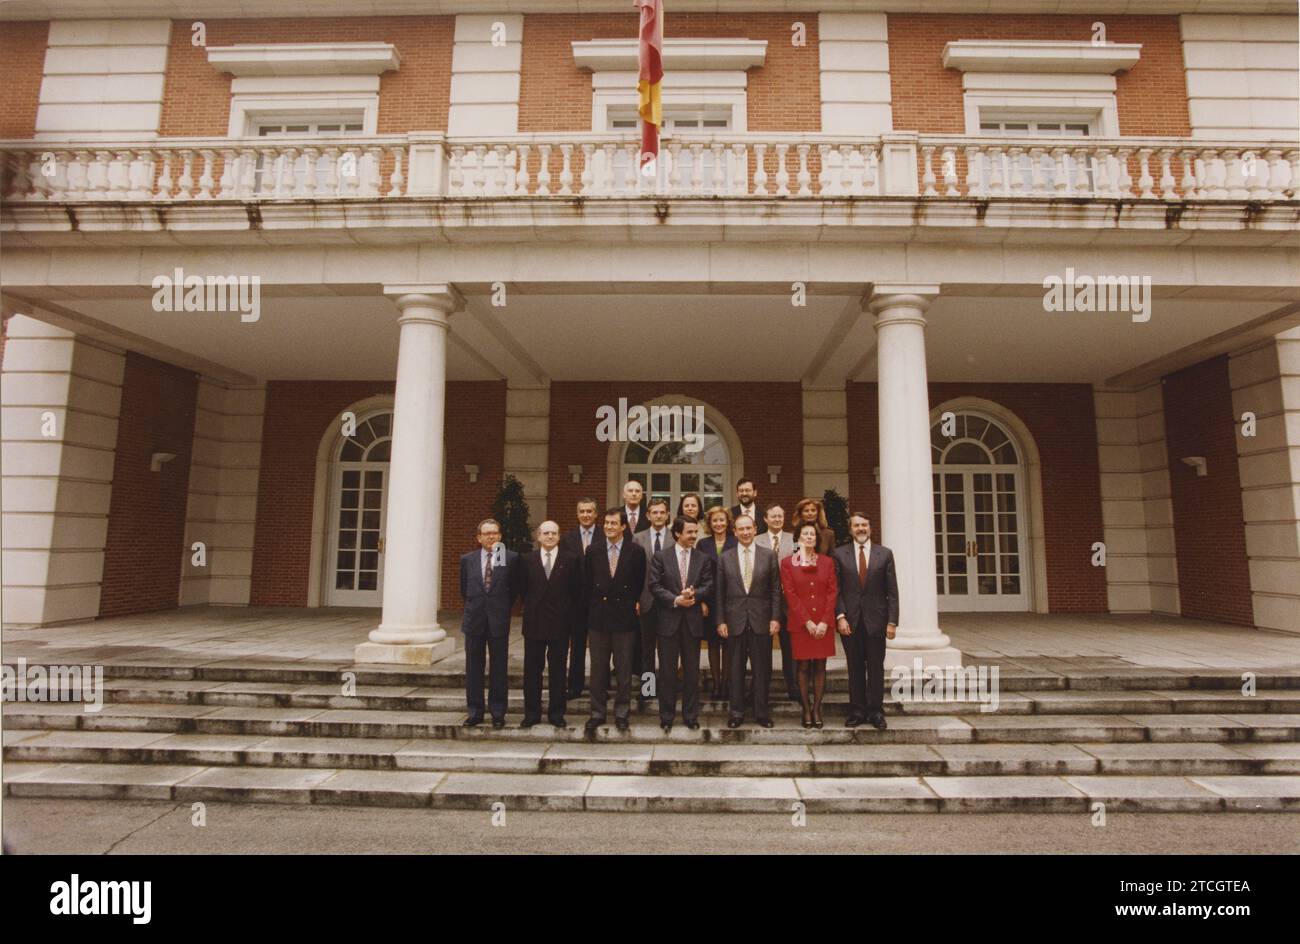 Madrid, 05/07/1996. First meeting of the Council of Ministers. Family photo at the entrance to the La Moncloa Palace. In the image, first row, left. From left to right: Eduardo Serra (Defense), Abel Matutes (Foreign Affairs), Francisco Álvarez Cascos (1st Vice President and Presidency), José María Aznar, Rodrigo Rato (2nd Vice President and Economy and Finance), Margarita Mariscal de Gante (Justice), and Jaime Mayor Oreja (Interior). Second row, from left. From left to right: Javier Arenas (Labor and Social Affairs), Rafael Arias Salgado (Development), Esperanza Aguirre (Education and Culture) Stock Photo